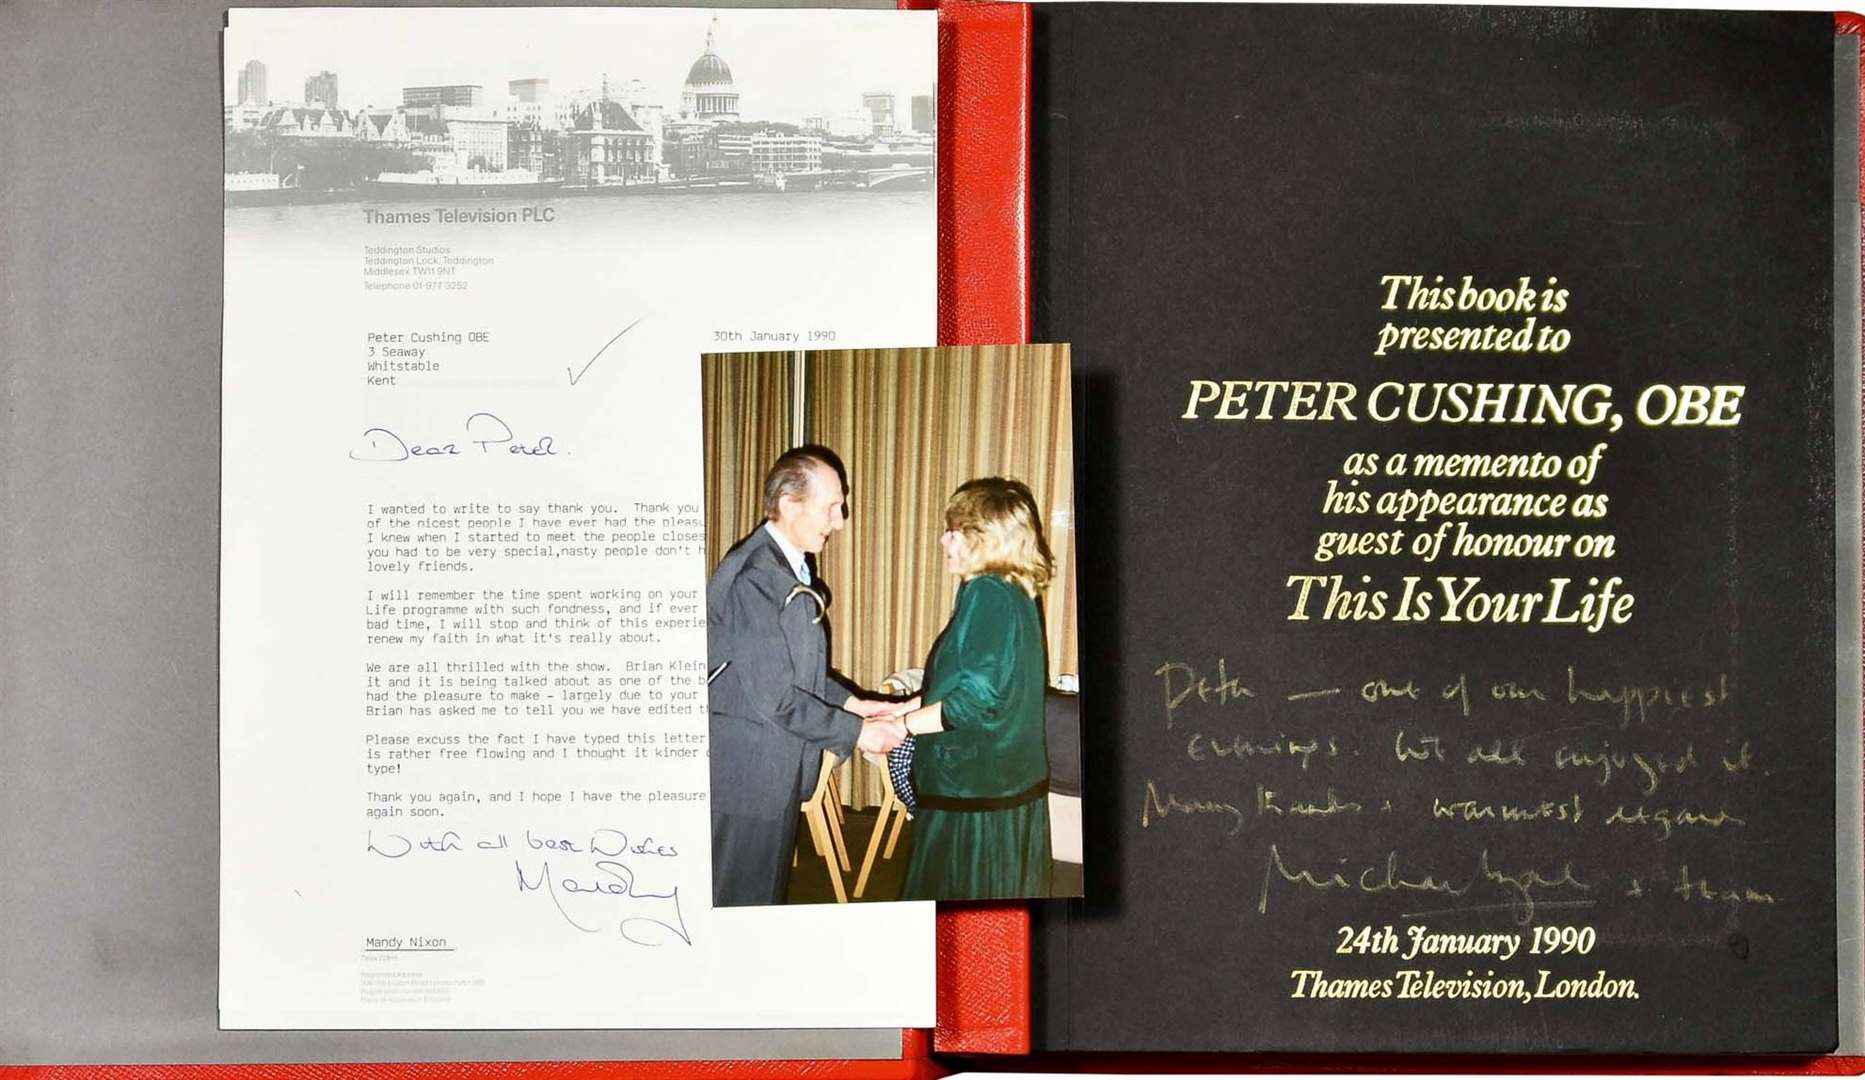 The big red book from Peter Cushing's appearance on This is Your Life sold for £3,200